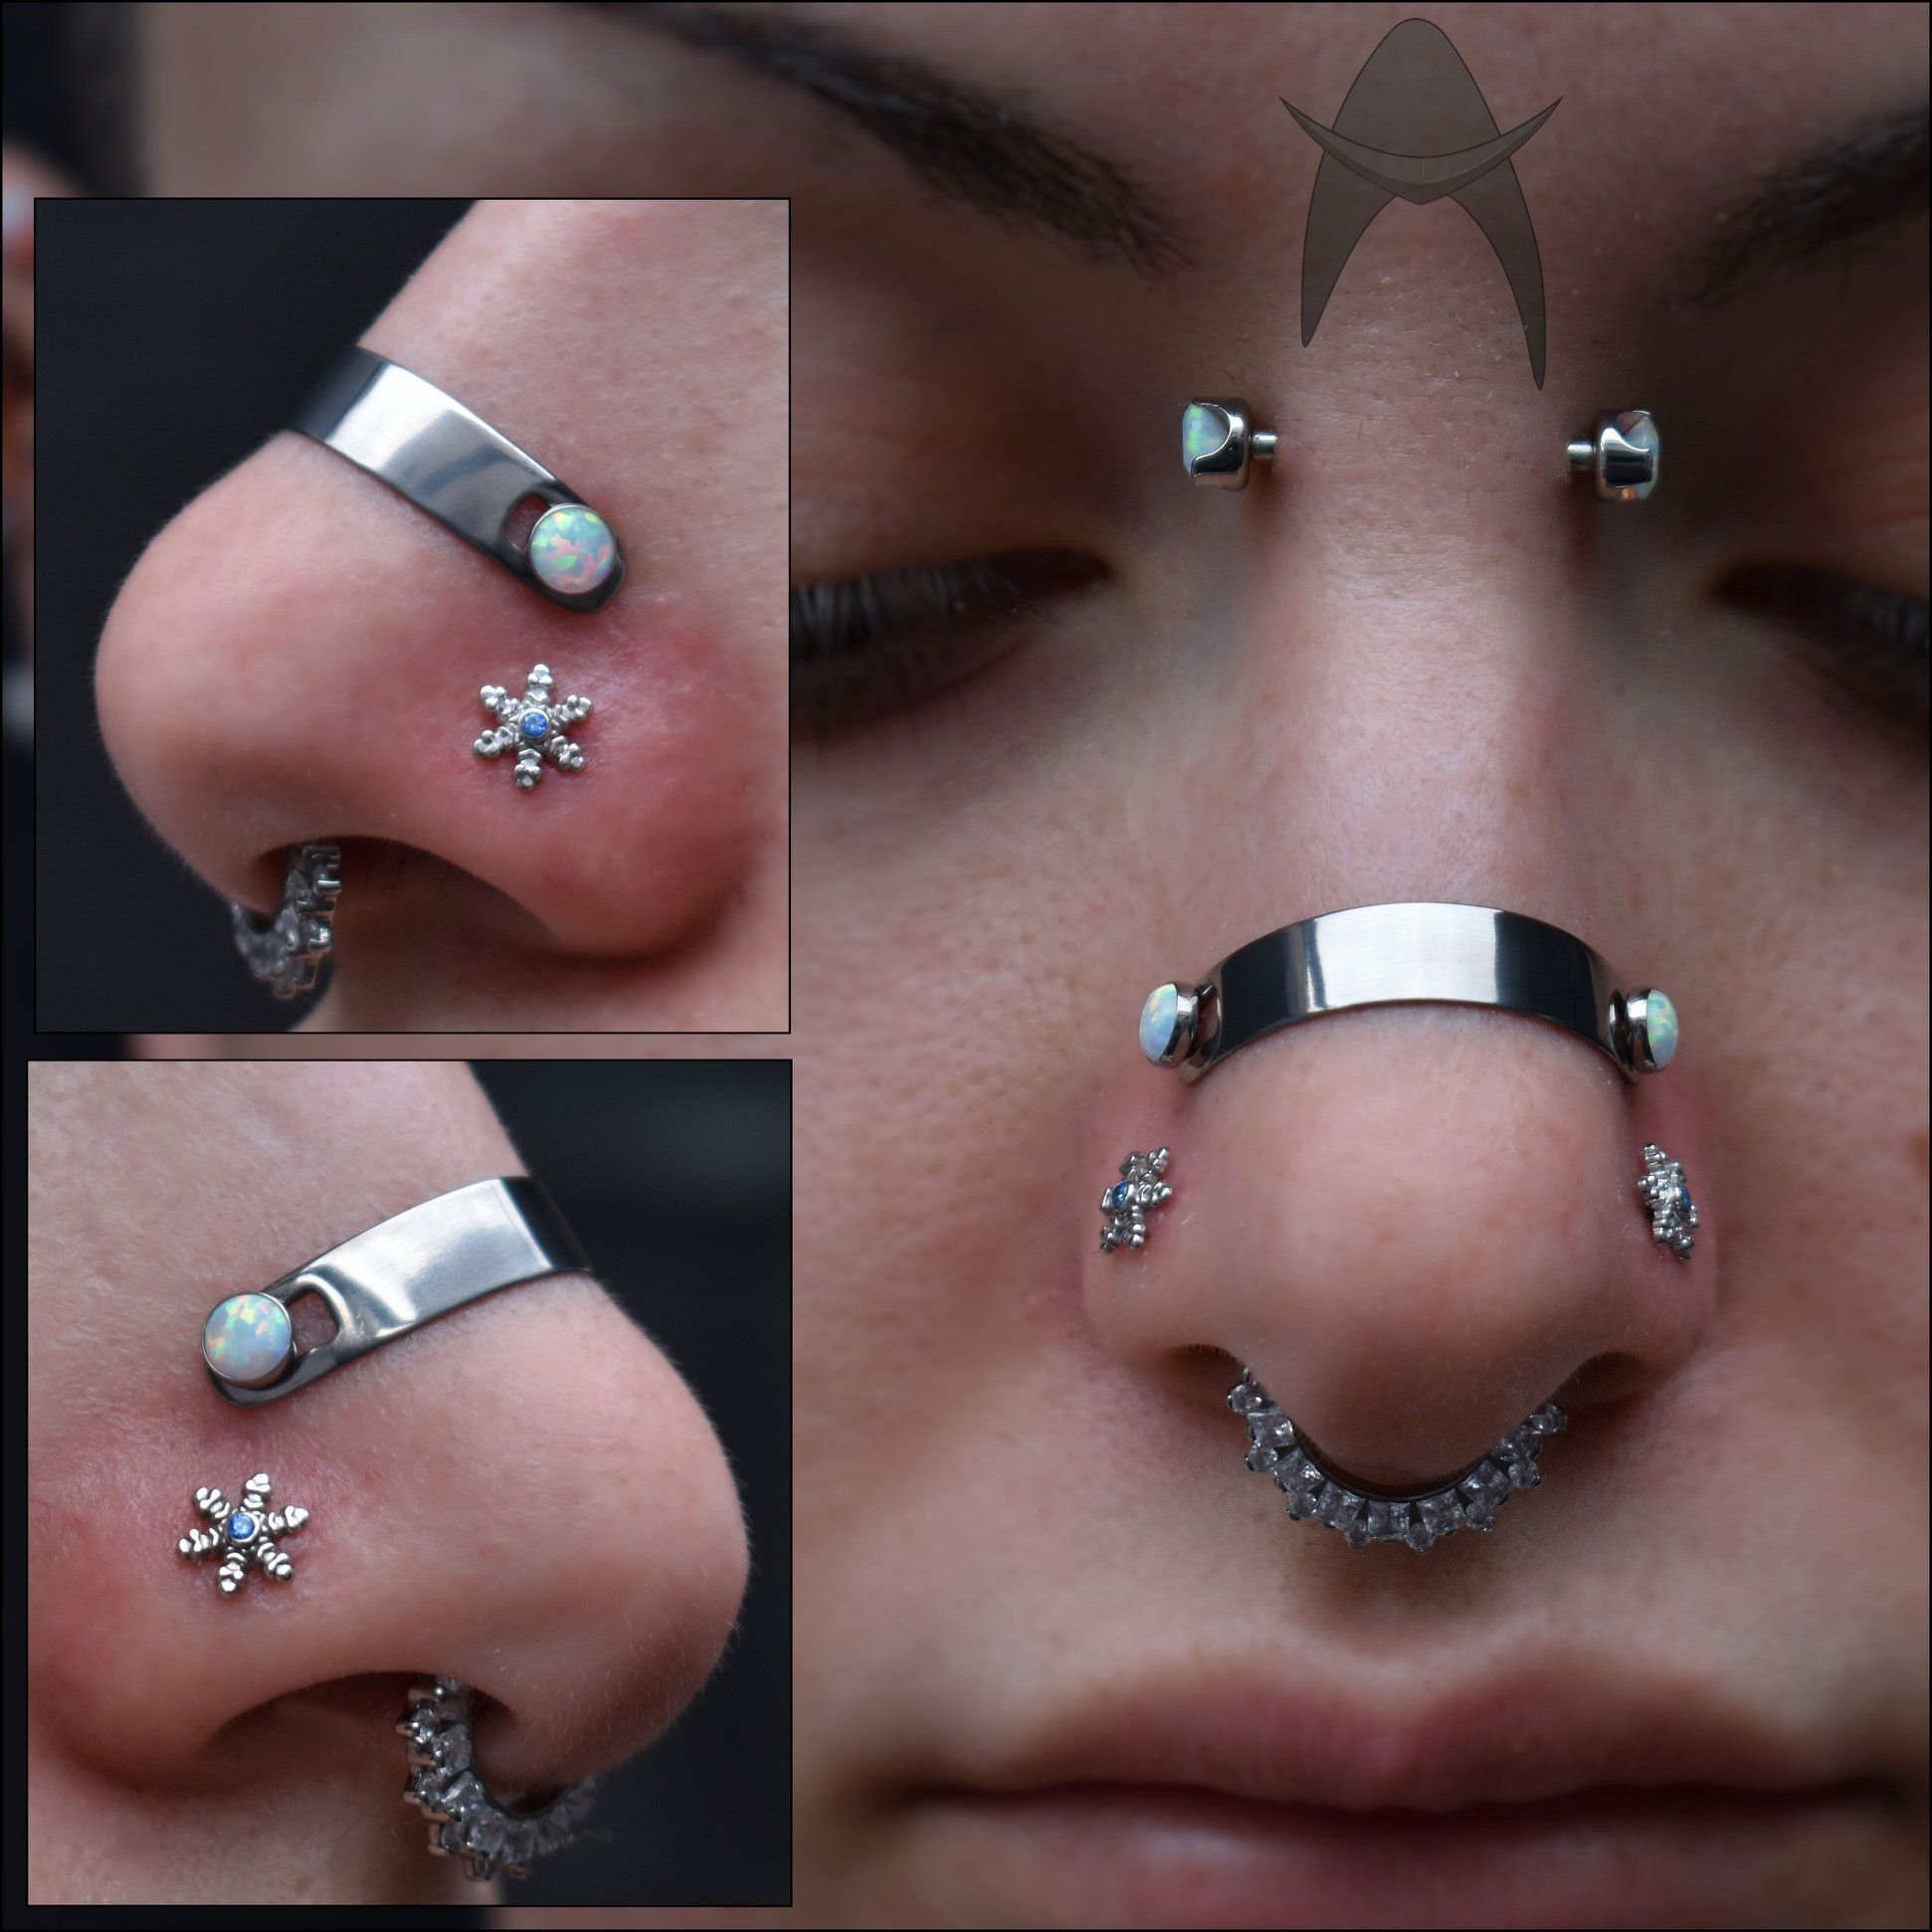 Double dycode piercing